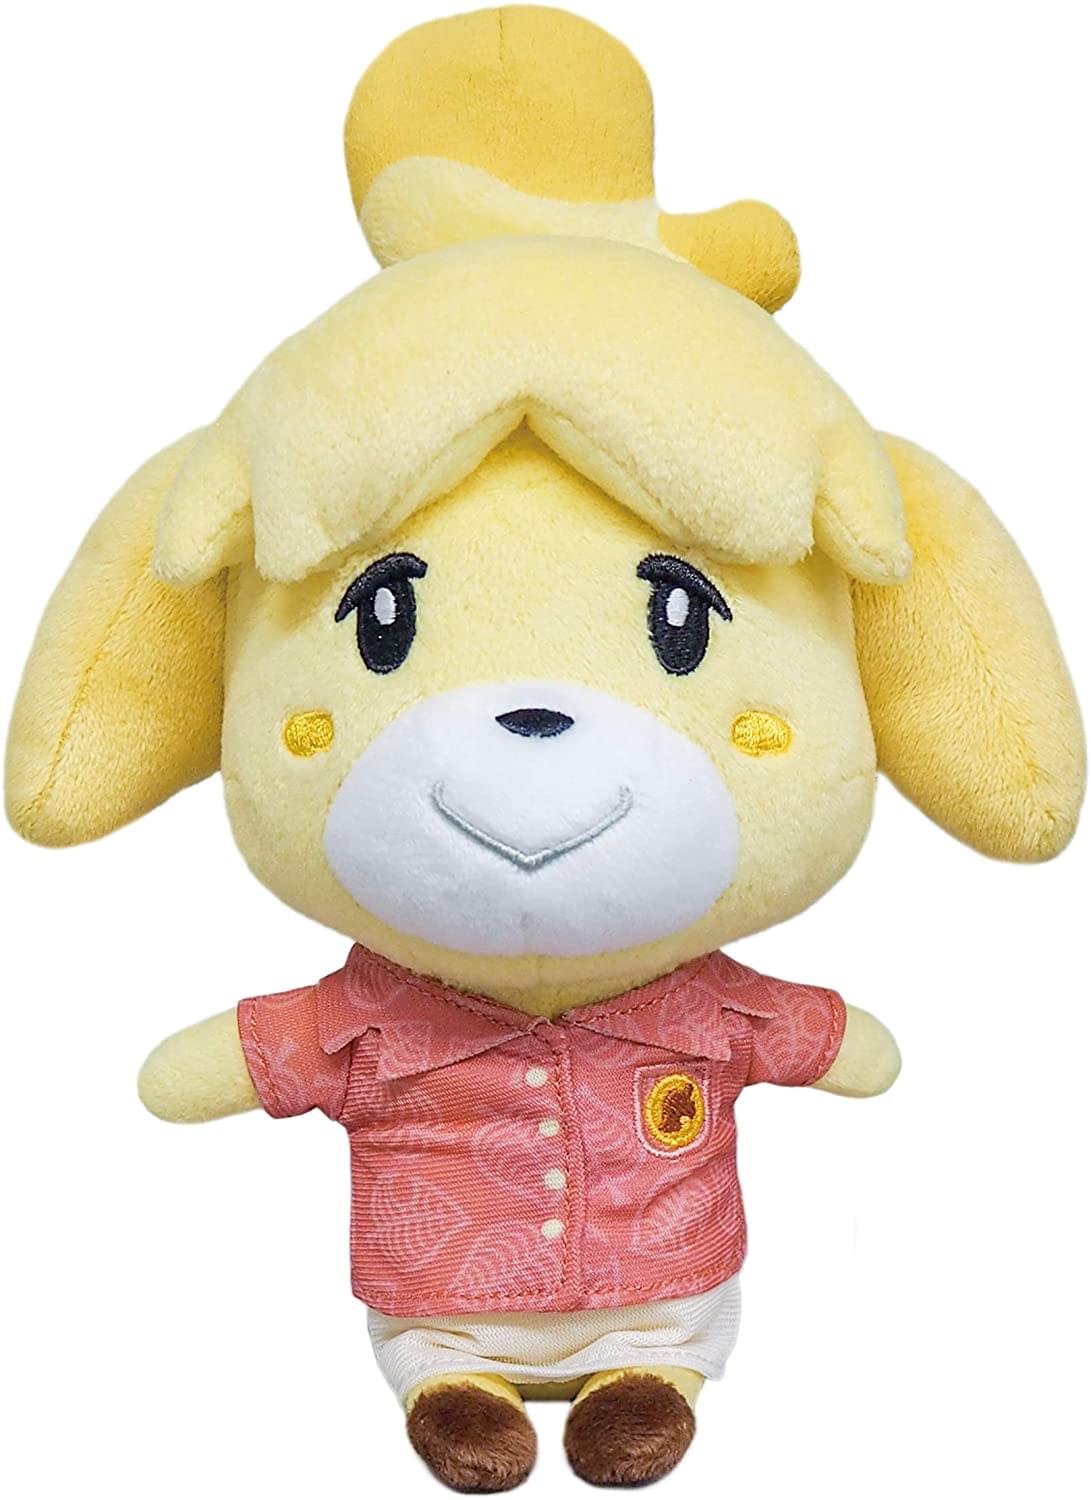 Animal Crossing New Horizons 8 Inch Plush , Isabelle